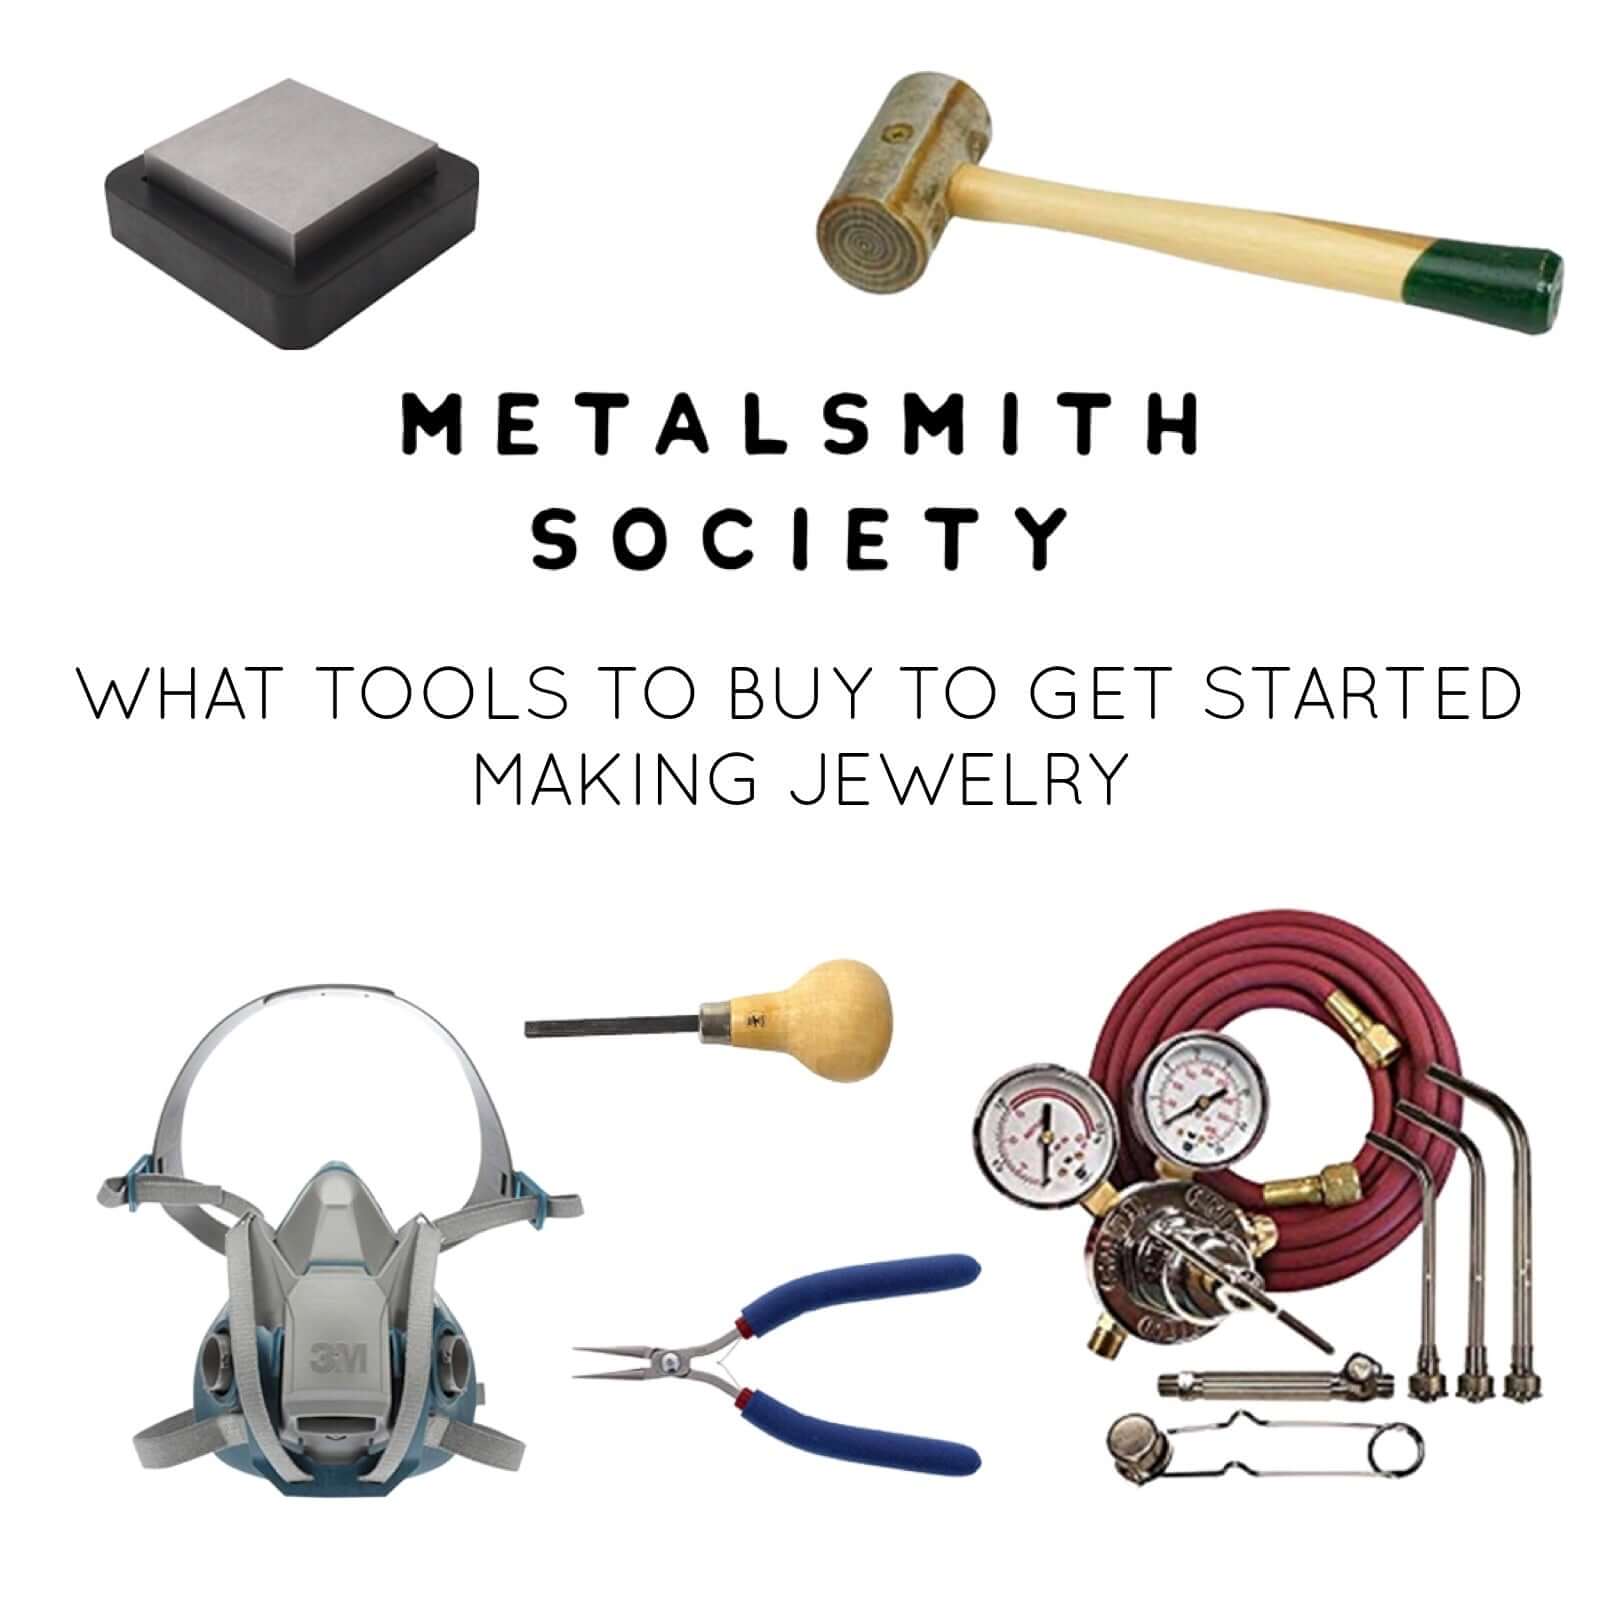 JEWELRY POLISHING TOOLS TO TREAT YOURSELF TO THIS HOLIDAY SEASON